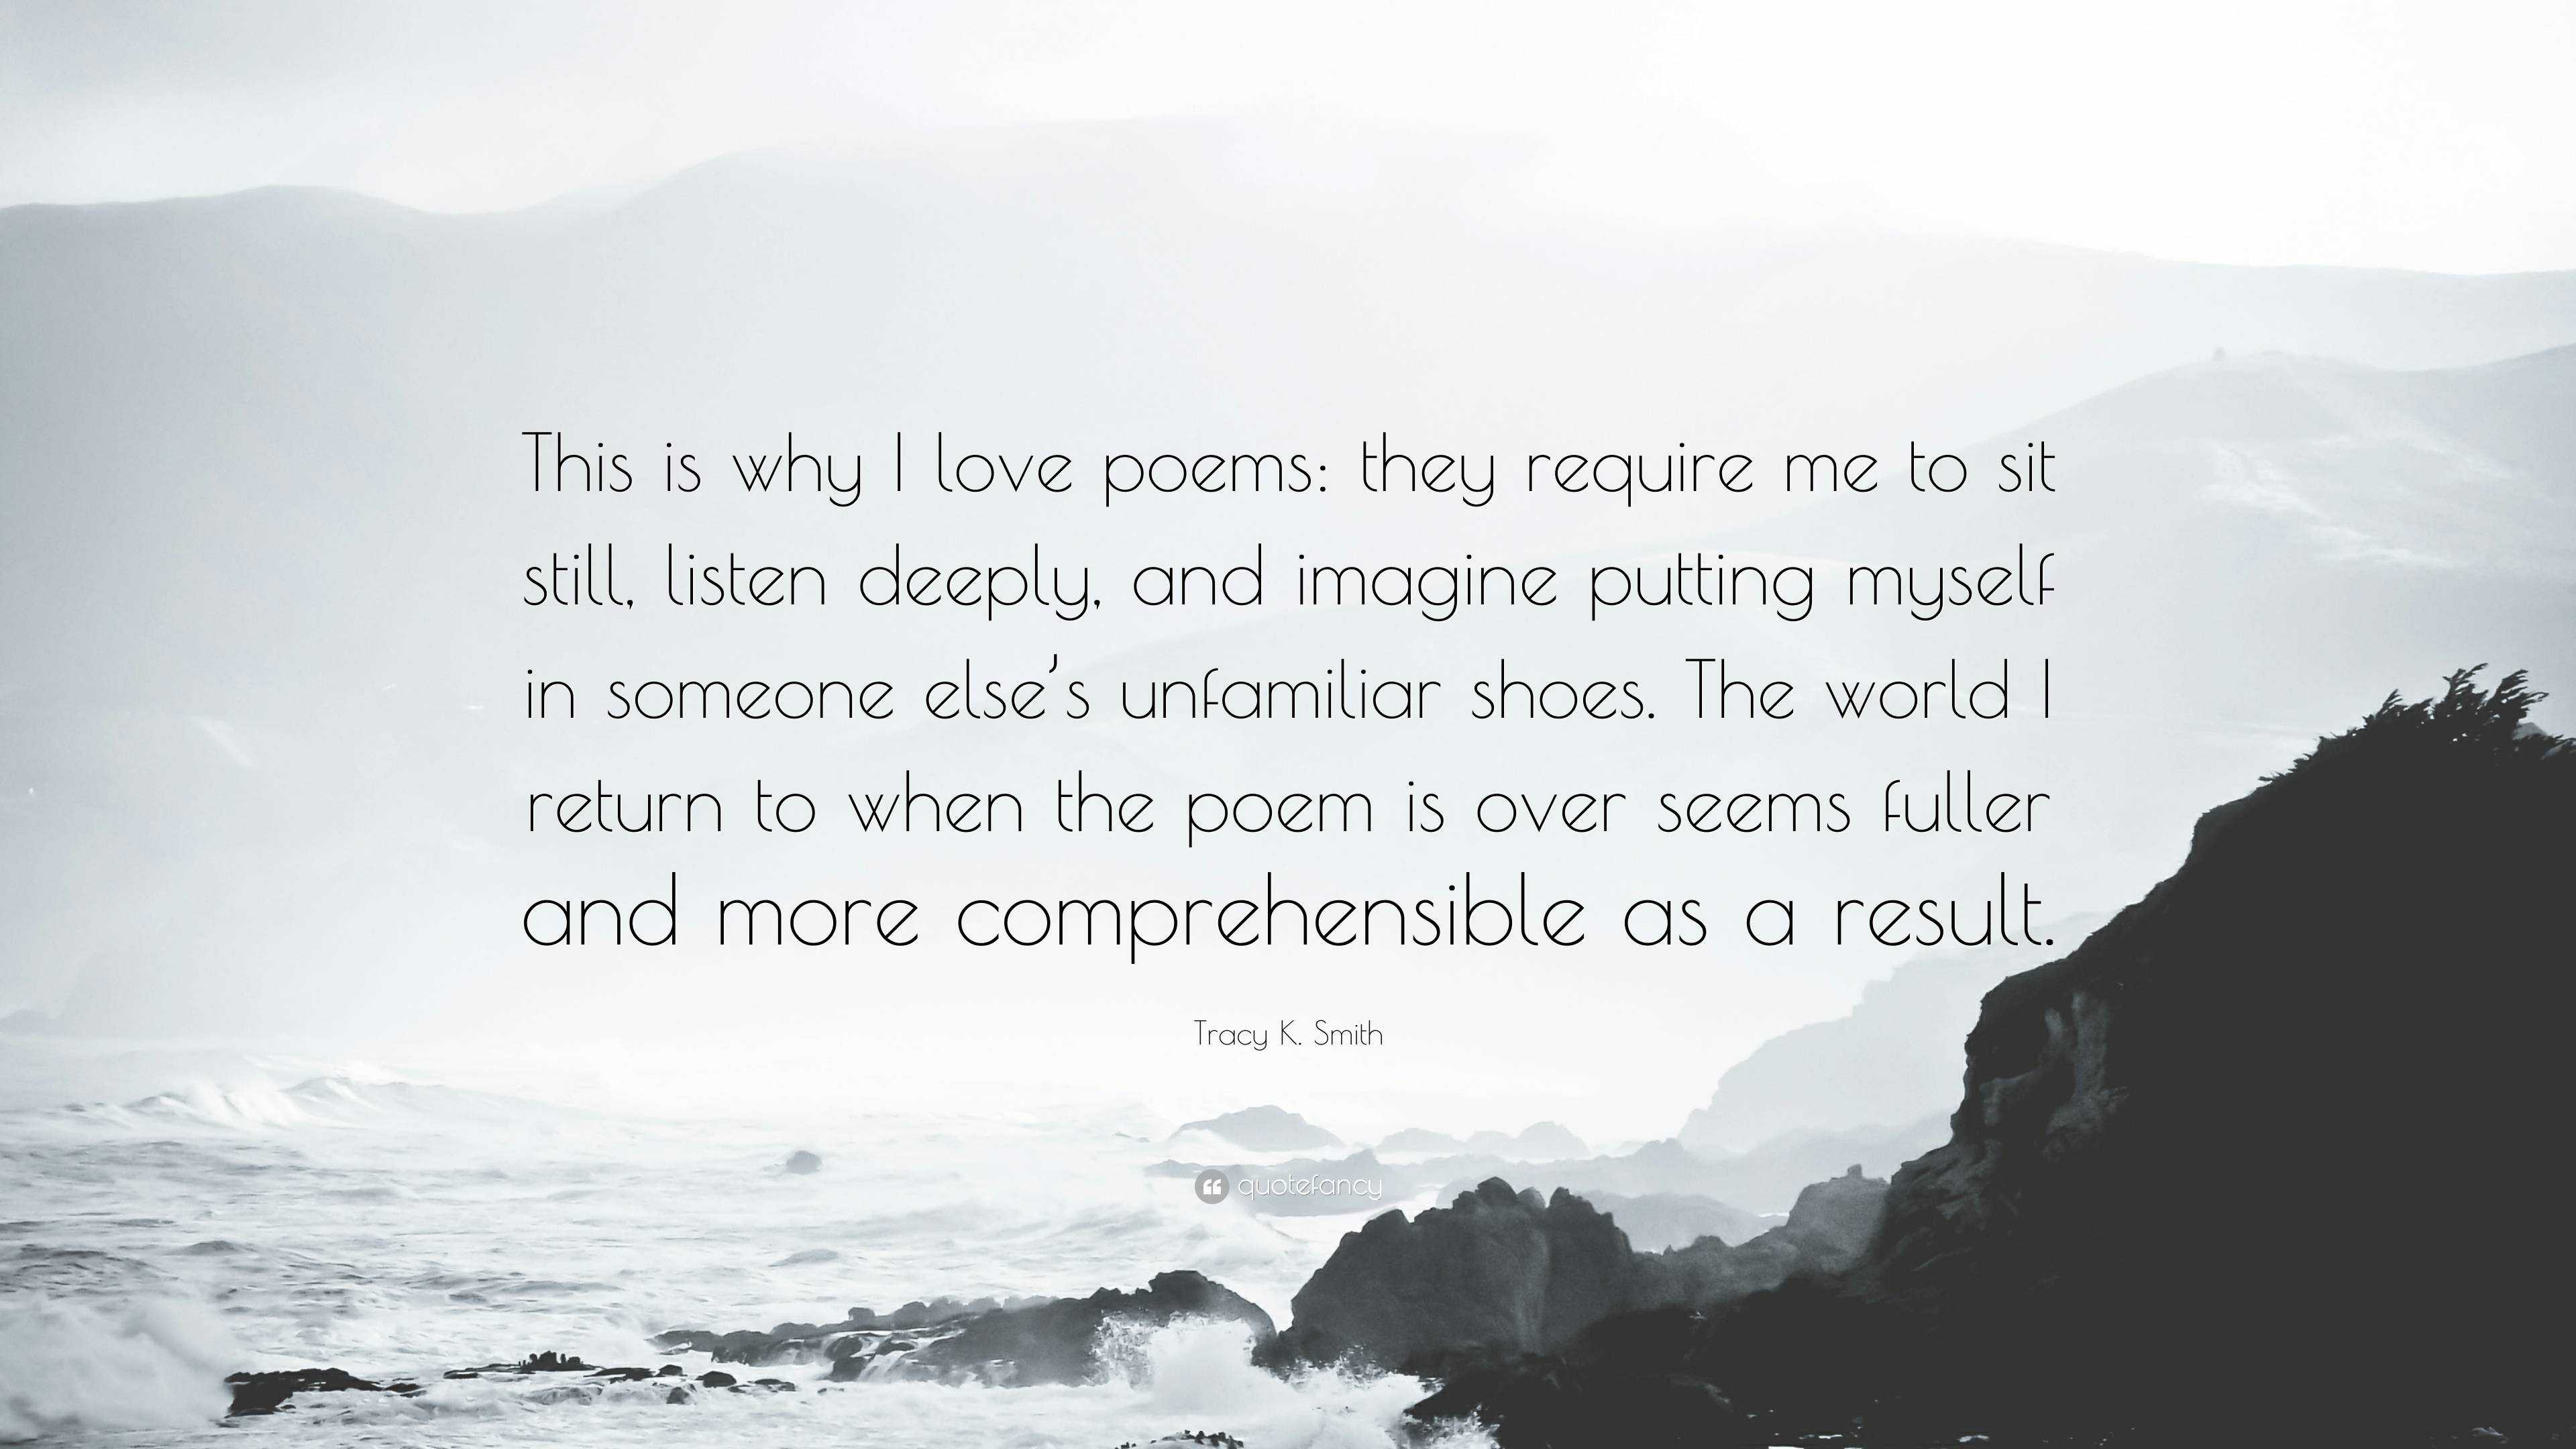 Tracy K. Smith Quote: “This is why I love poems: they require me